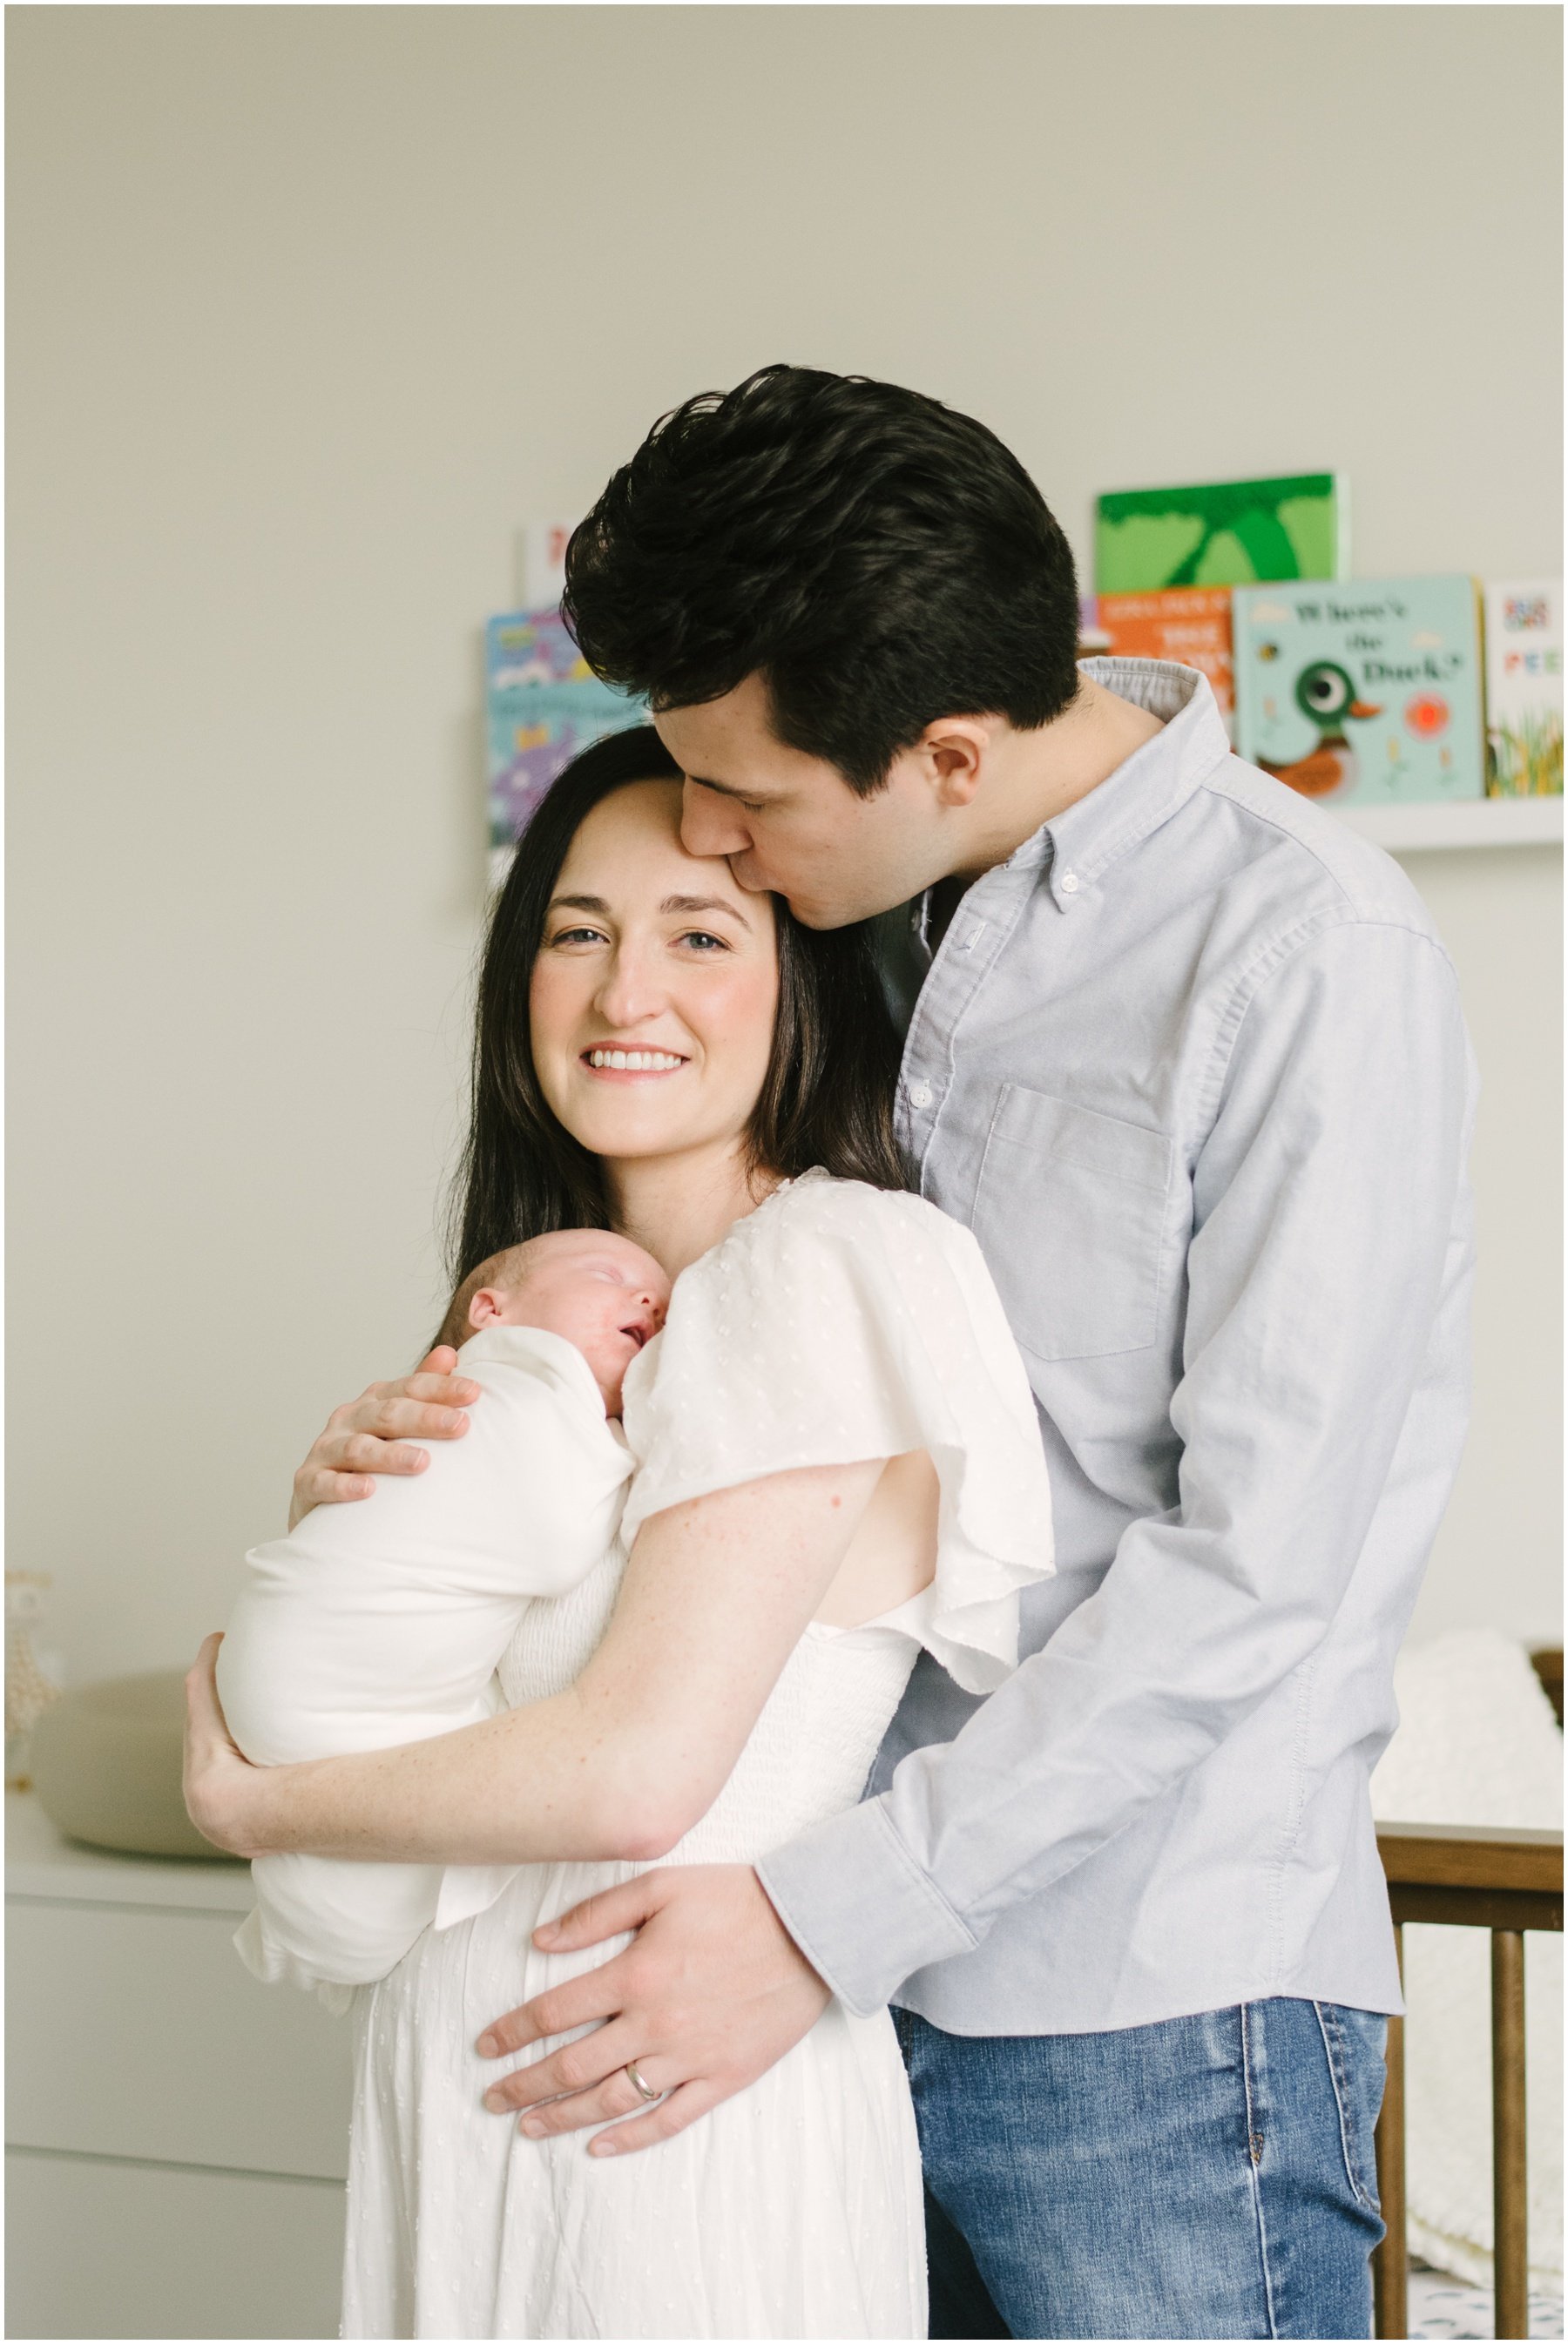 Dad standing behind mom and baby during newborn session | NKB Photo